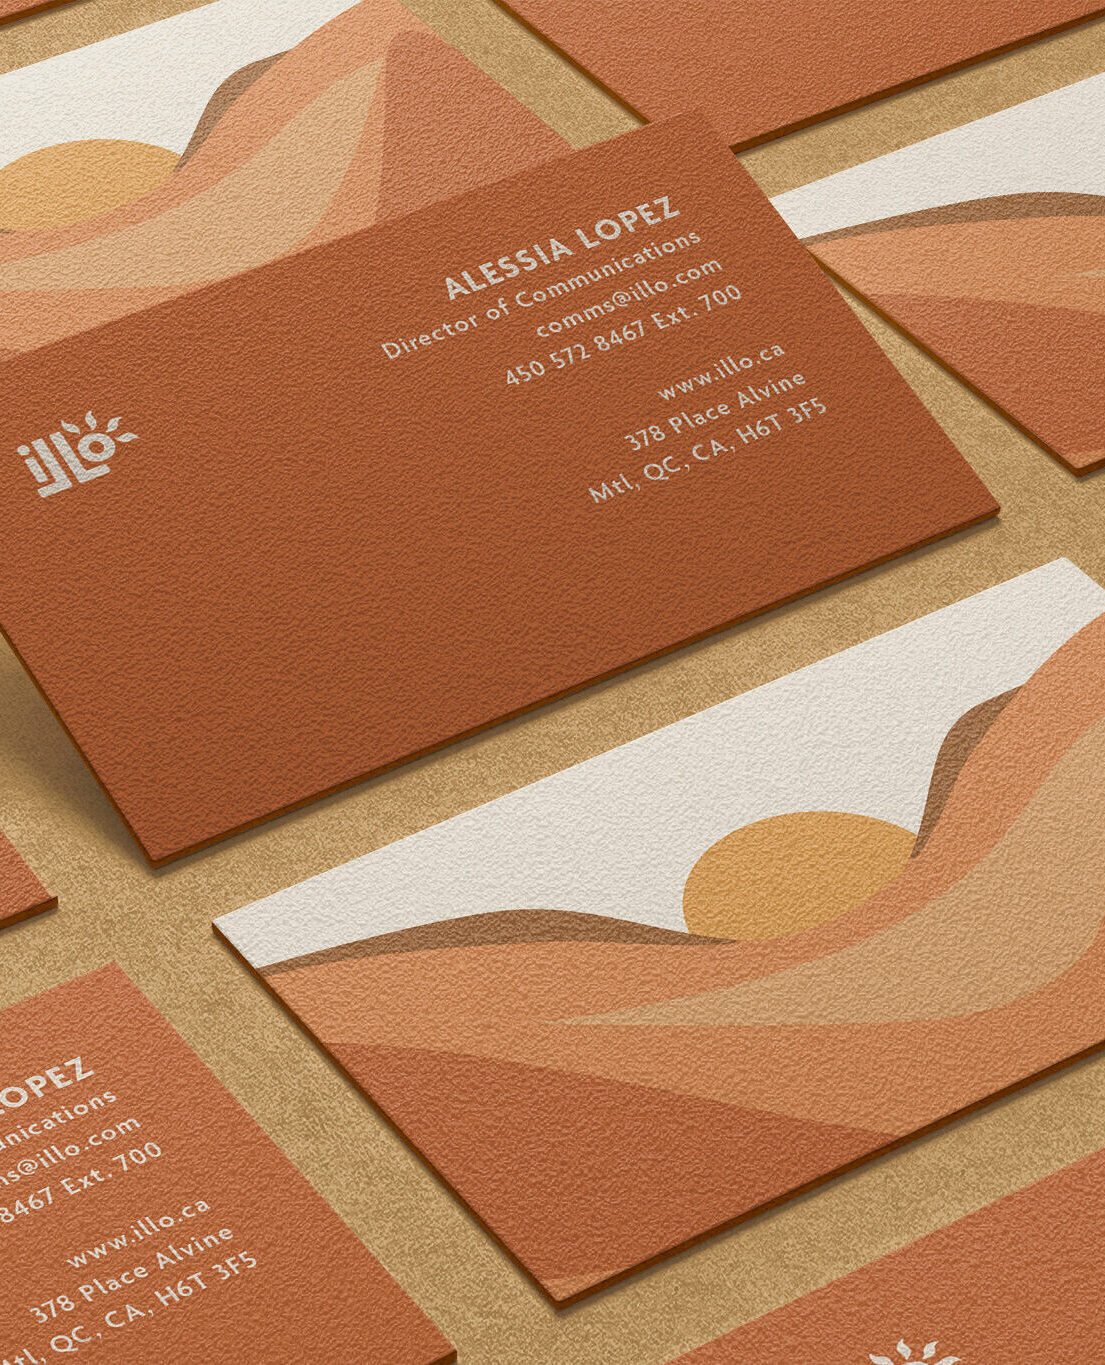 Business cards created for an imagined travel agency called illo adventures. These are the desert themed orange ones with an illustrated landscape of the desert on the back.